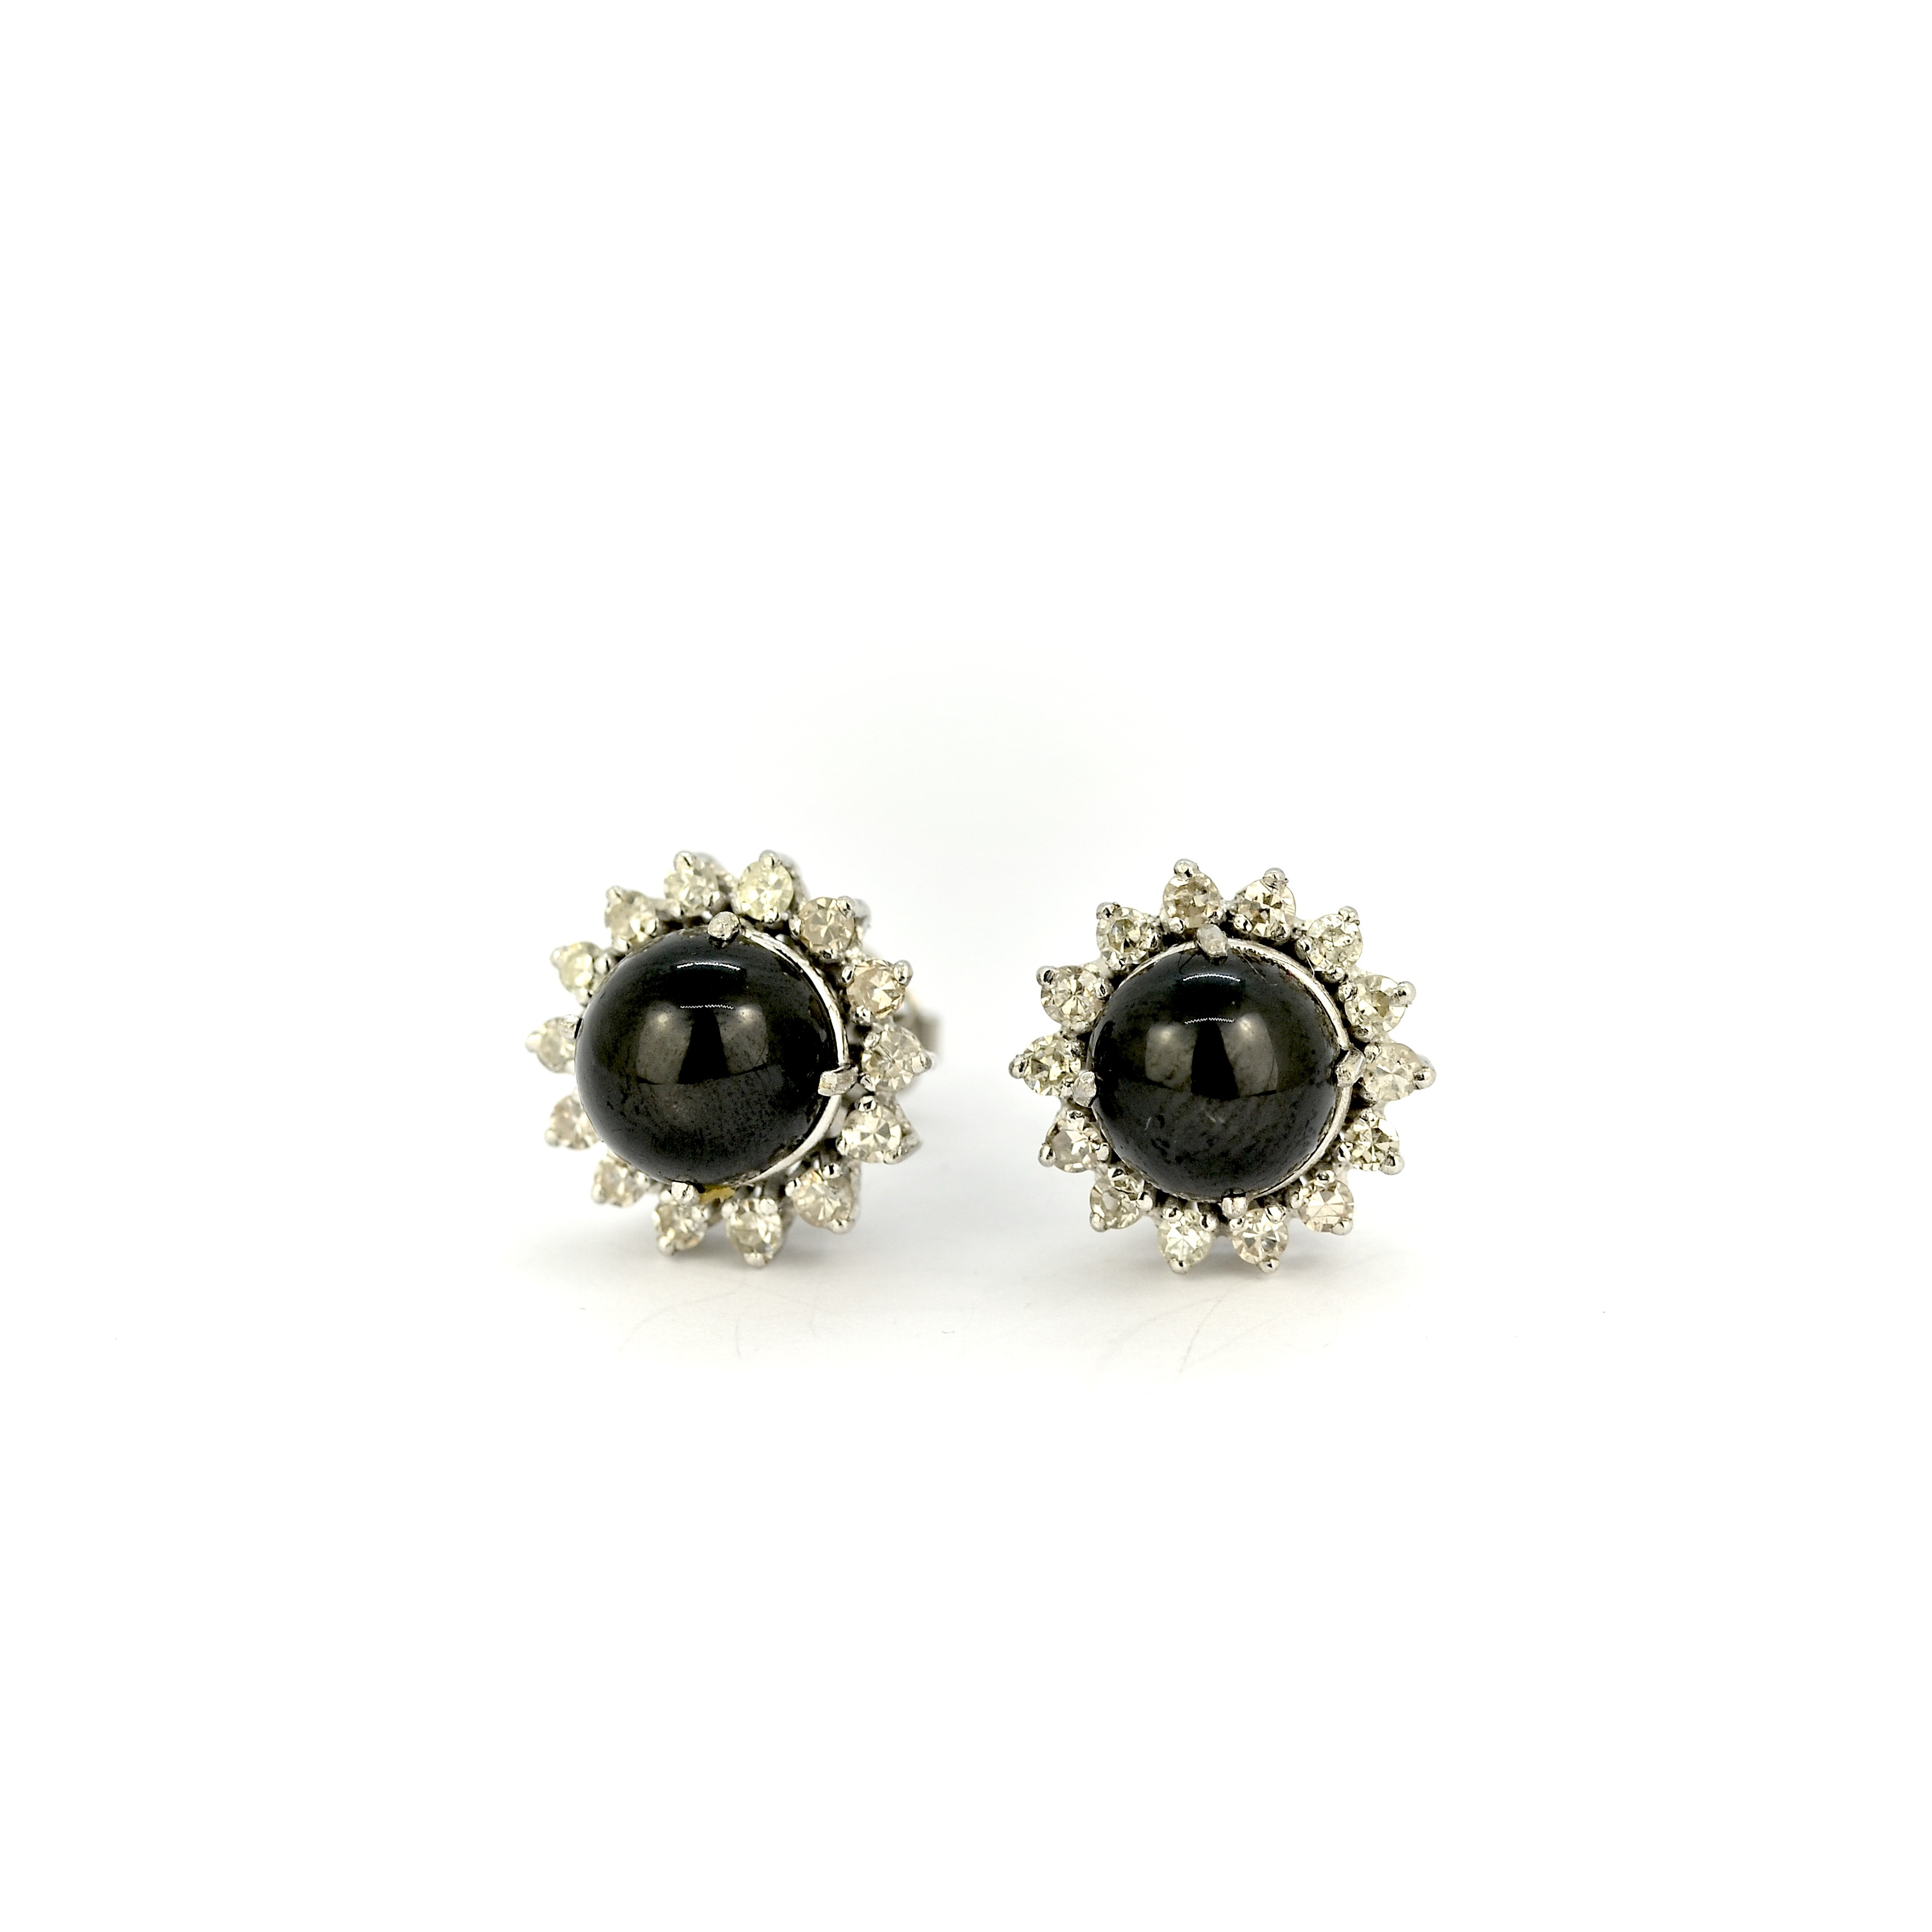 A pair of 18ct white gold cluster stud earrings each set with a cabochon star sapphire